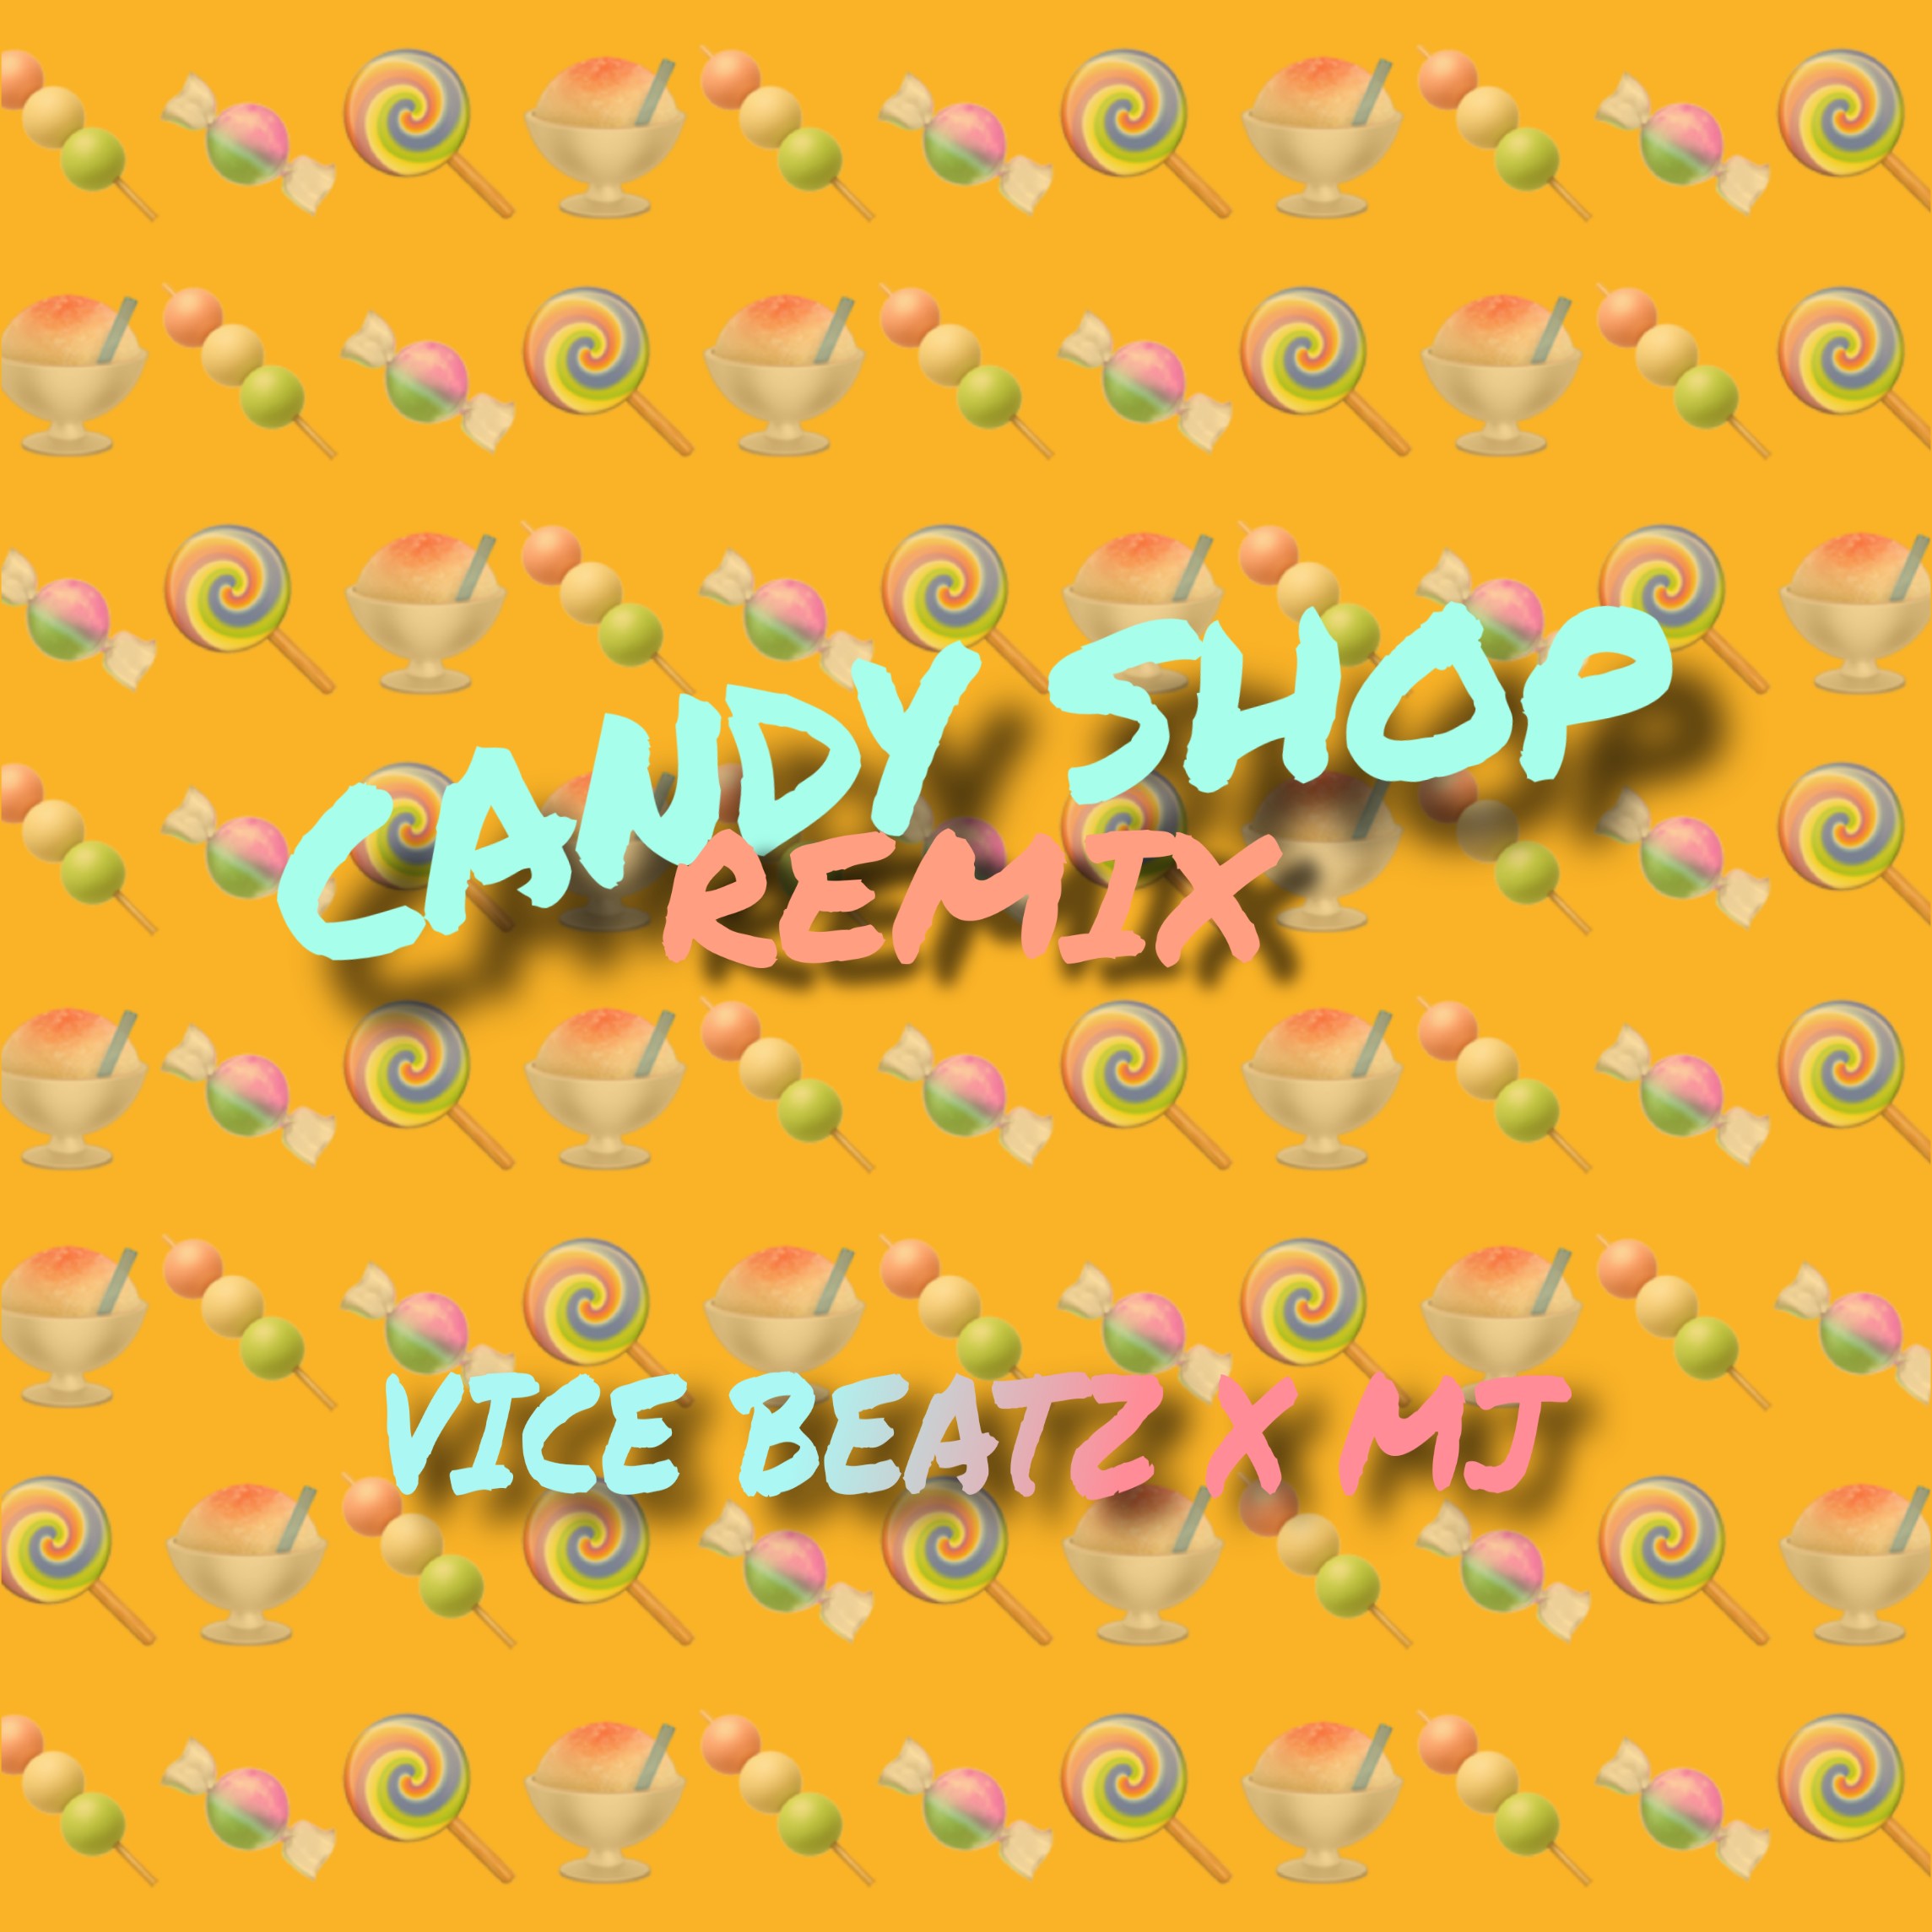 Khuphela Candy Shop (Vice_Beatz & MJ Remix)_ CLICK ON 'BUY' For Free Download